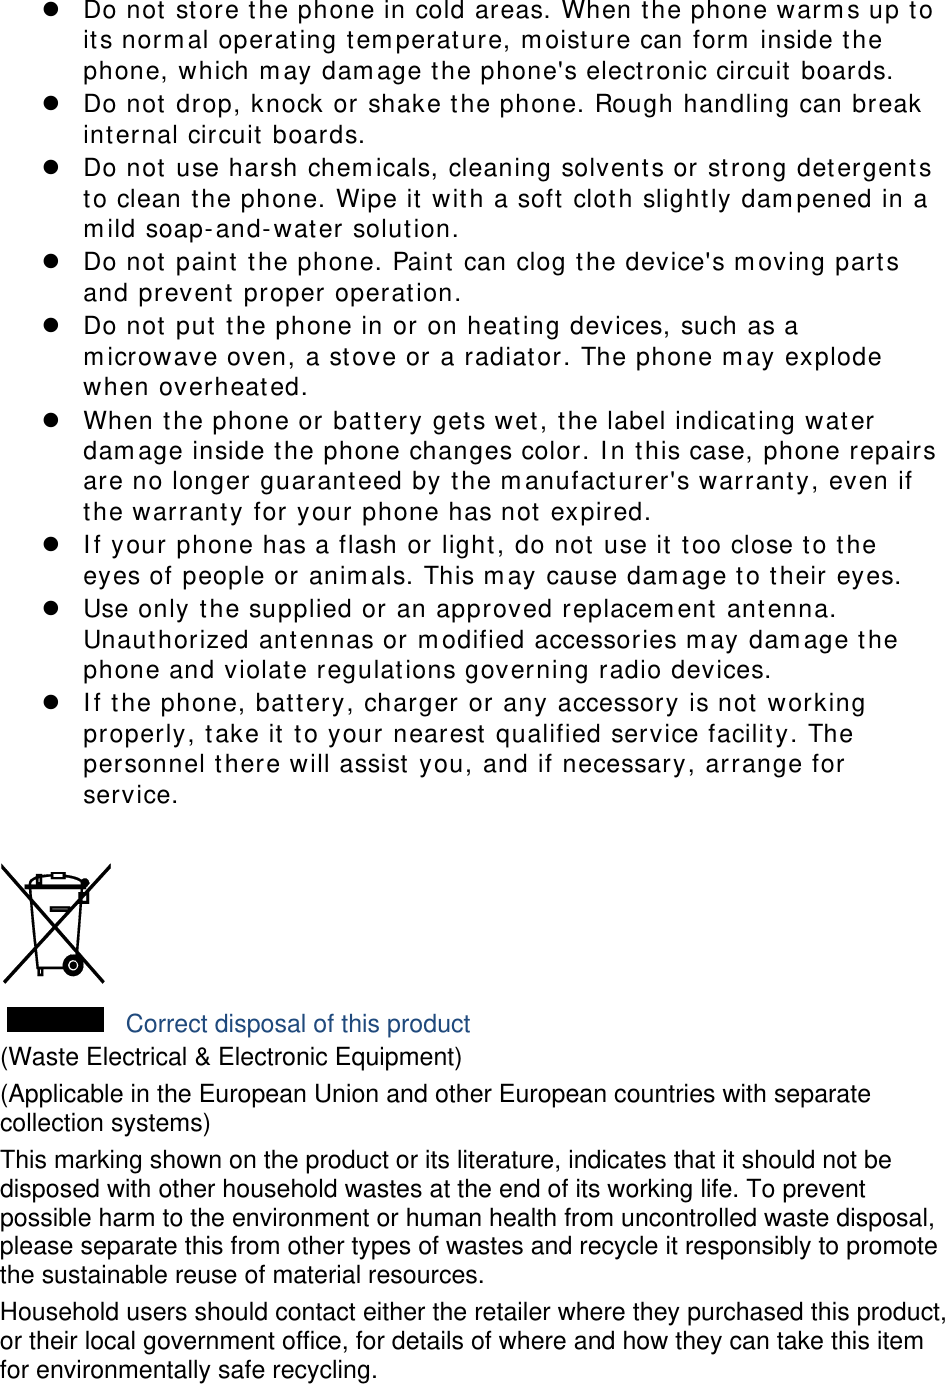  Do not store the phone in cold areas. When the phone warms up to its normal operating temperature, moisture can form inside the phone, which may damage the phone&apos;s electronic circuit boards.  Do not drop, knock or shake the phone. Rough handling can break internal circuit boards.  Do not use harsh chemicals, cleaning solvents or strong detergents to clean the phone. Wipe it with a soft cloth slightly dampened in a mild soap-and-water solution.  Do not paint the phone. Paint can clog the device&apos;s moving parts and prevent proper operation.  Do not put the phone in or on heating devices, such as a microwave oven, a stove or a radiator. The phone may explode when overheated.  When the phone or battery gets wet, the label indicating water damage inside the phone changes color. In this case, phone repairs are no longer guaranteed by the manufacturer&apos;s warranty, even if the warranty for your phone has not expired.   If your phone has a flash or light, do not use it too close to the eyes of people or animals. This may cause damage to their eyes.  Use only the supplied or an approved replacement antenna. Unauthorized antennas or modified accessories may damage the phone and violate regulations governing radio devices.  If the phone, battery, charger or any accessory is not working properly, take it to your nearest qualified service facility. The personnel there will assist you, and if necessary, arrange for service.   Correct disposal of this product (Waste Electrical &amp; Electronic Equipment) (Applicable in the European Union and other European countries with separate collection systems) This marking shown on the product or its literature, indicates that it should not be disposed with other household wastes at the end of its working life. To prevent possible harm to the environment or human health from uncontrolled waste disposal, please separate this from other types of wastes and recycle it responsibly to promote the sustainable reuse of material resources. Household users should contact either the retailer where they purchased this product, or their local government office, for details of where and how they can take this item for environmentally safe recycling. 